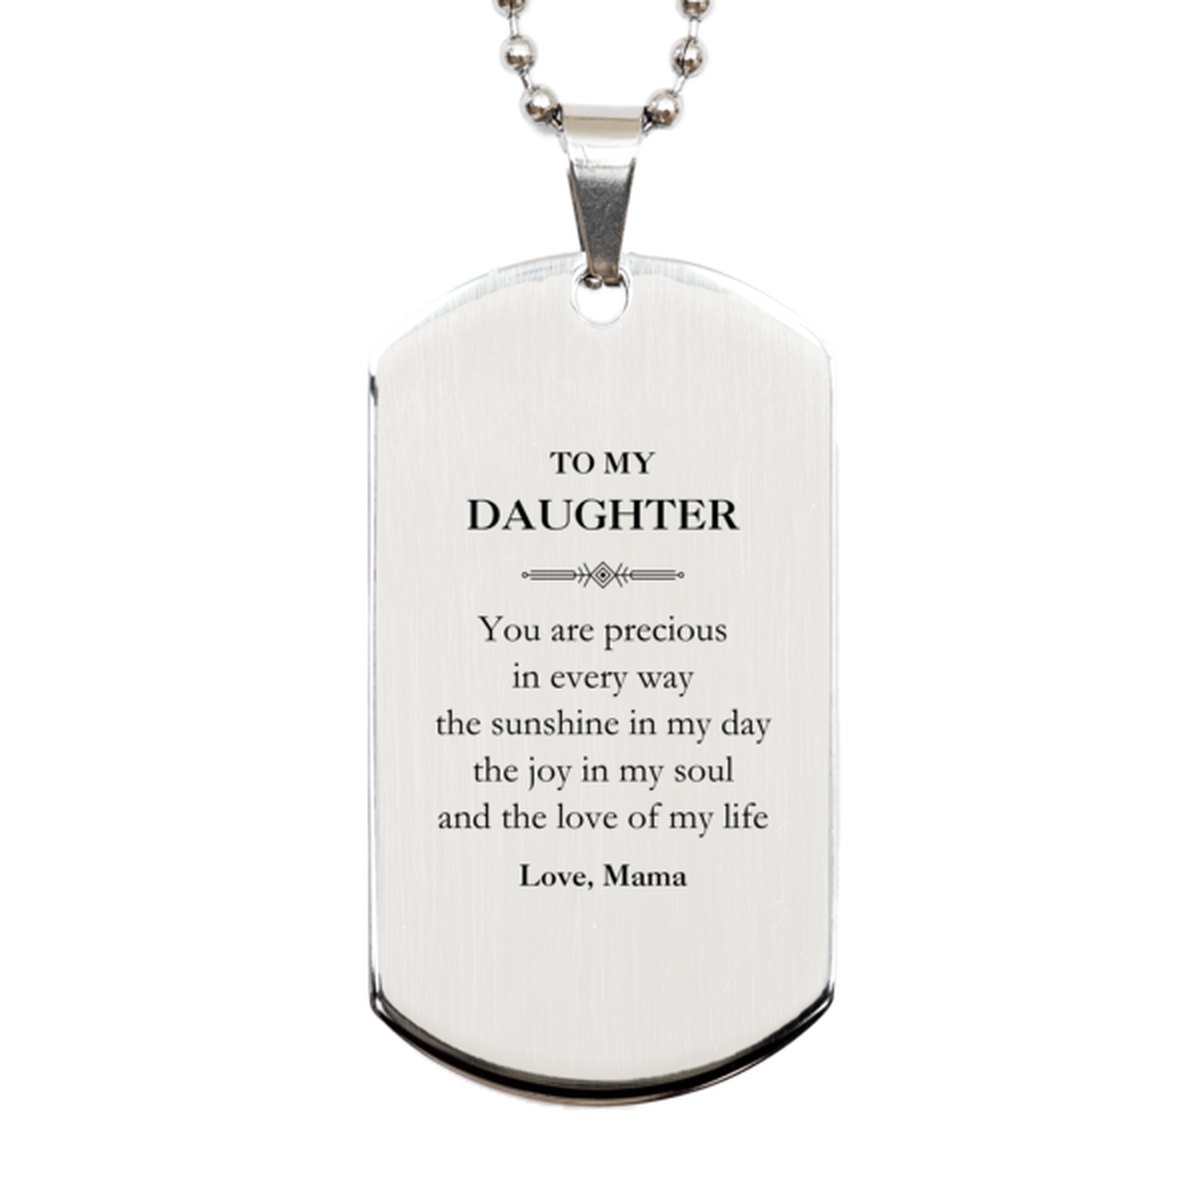 Graduation Gifts for Daughter Silver Dog Tag Present from Mama, Christmas Daughter Birthday Gifts Daughter You are precious in every way the sunshine in my day. Love, Mama